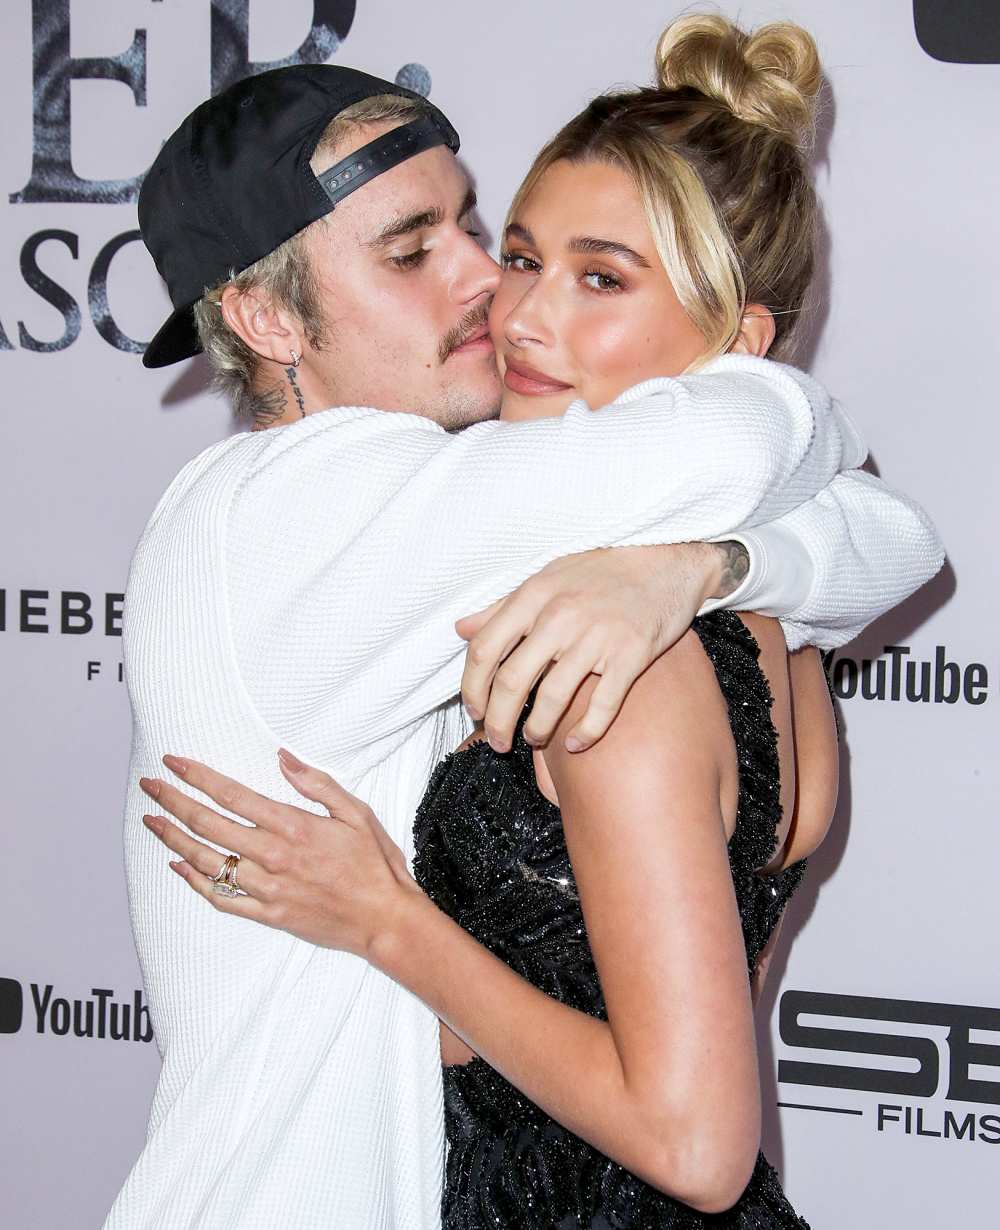 Justin-Bieber-Gets-‘Crazy’-in-the-Bedroom-With-Hailey-Baldwin